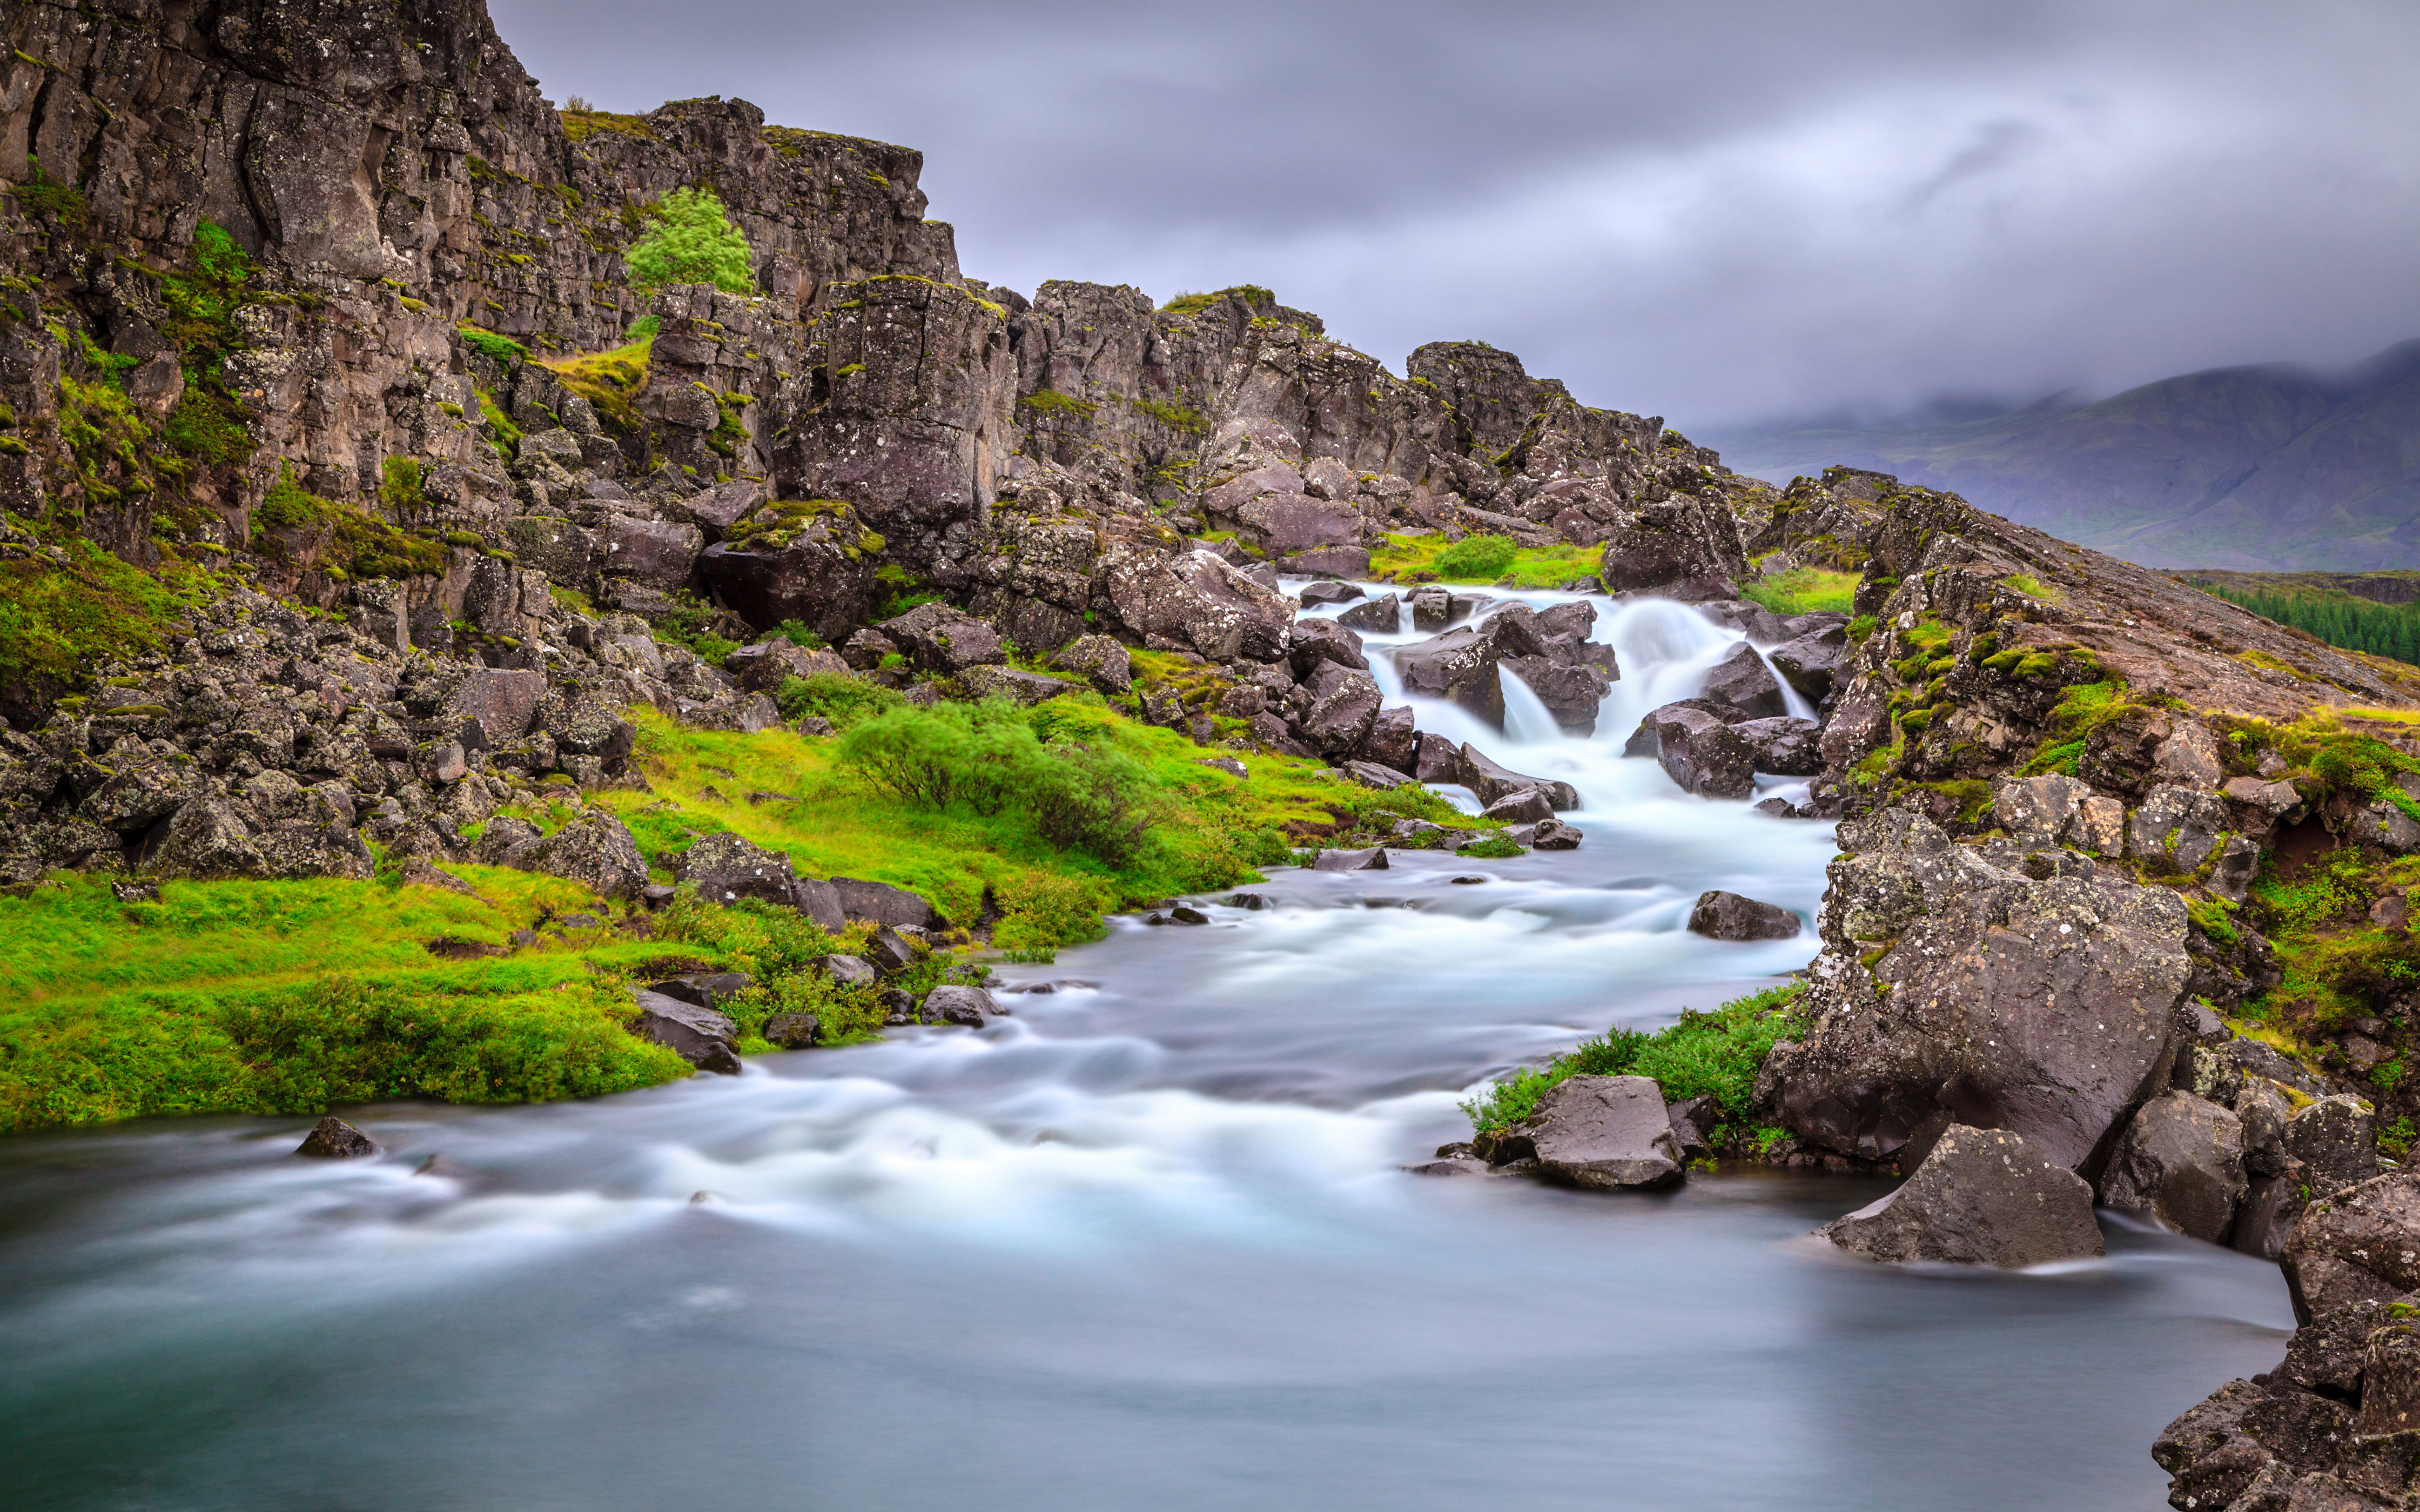 Beautiful Oxarafoss Waterfall In Iceland Europe Photo Landscape 4k Ultra HD Desktop Wallpaper For Computers Laptop Tablet And Mobile Phones 5200x3250, Wallpaper13.com